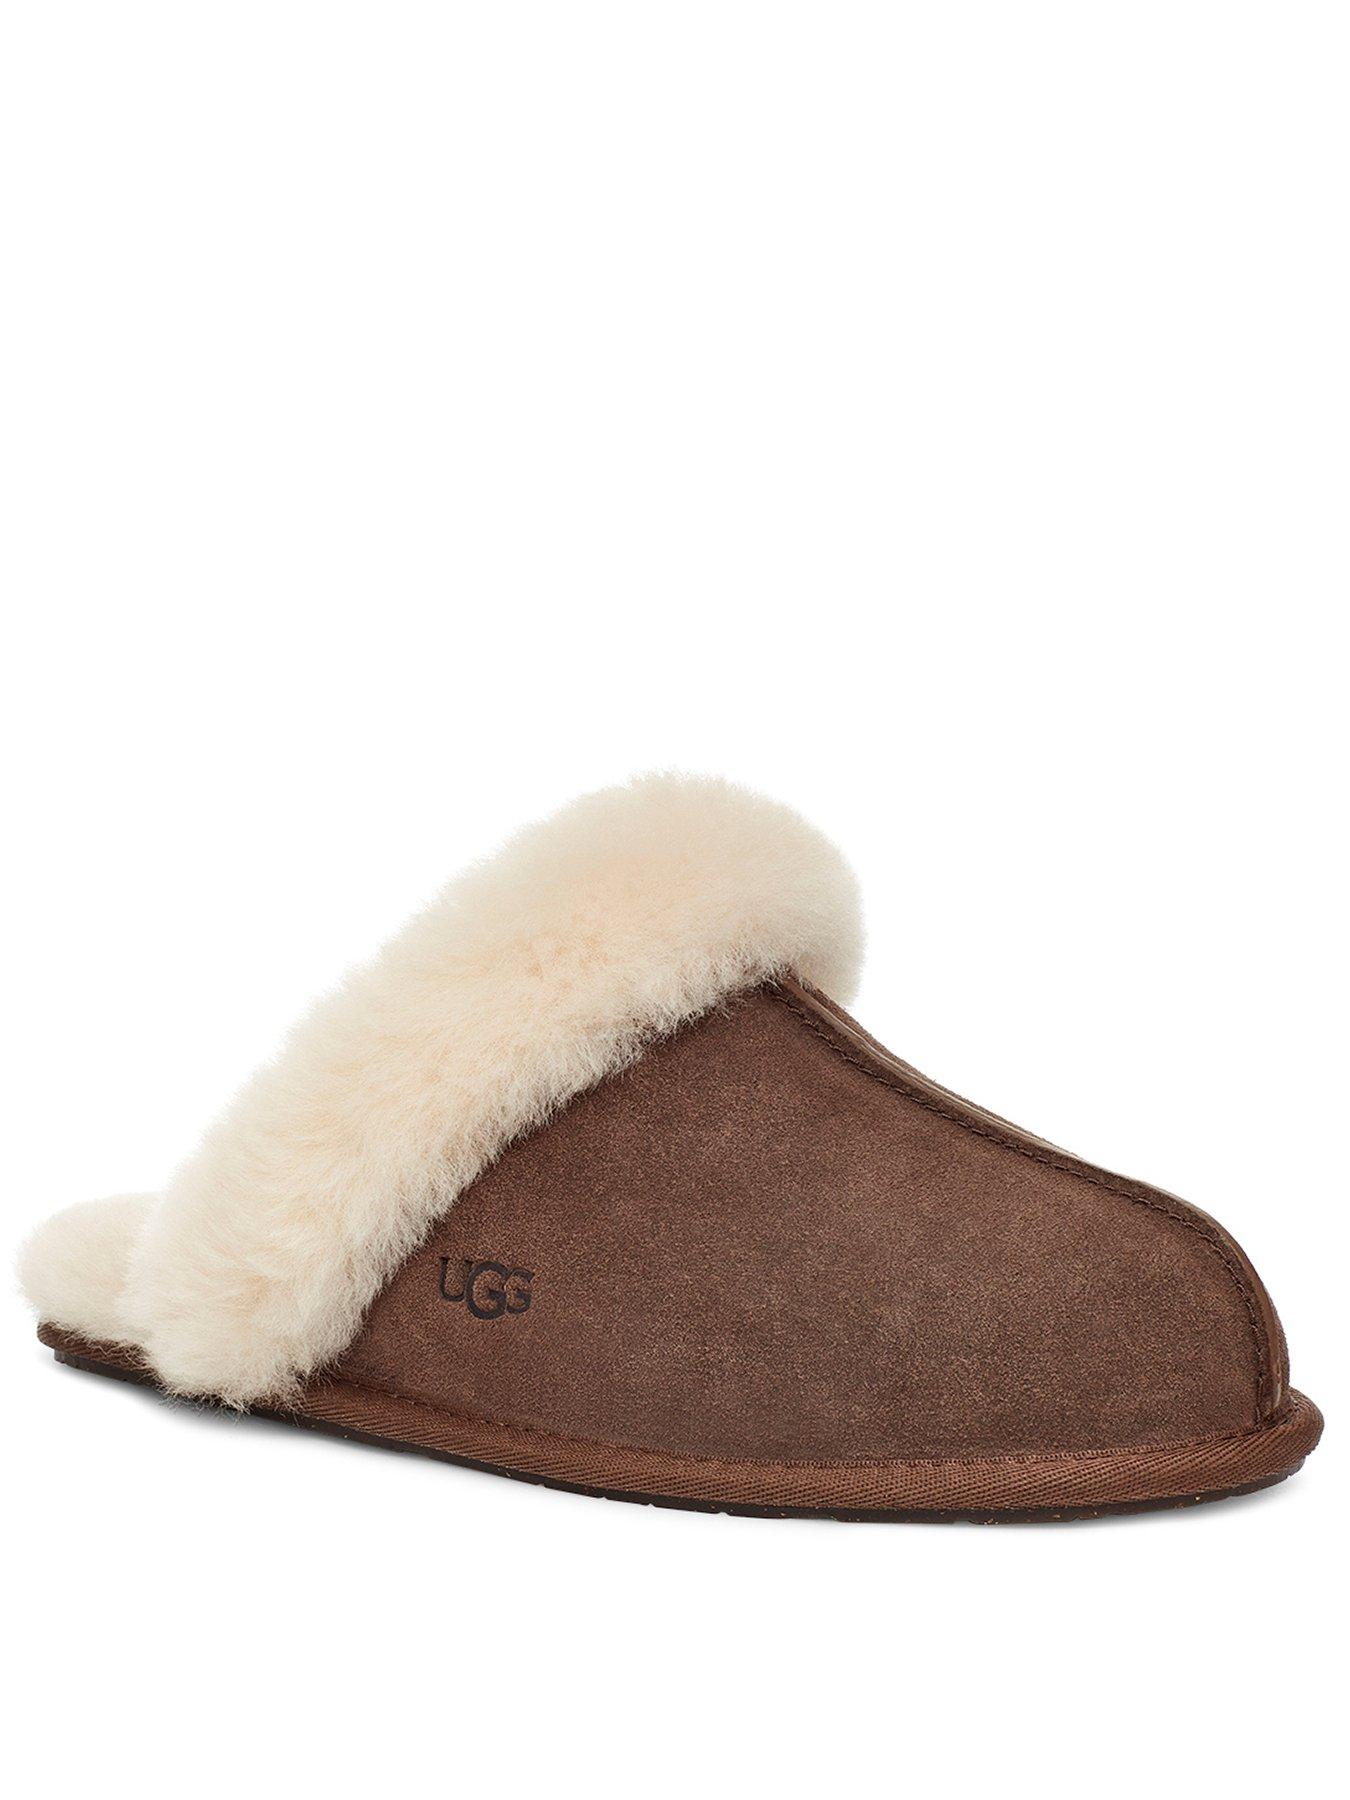 womens ugg slippers size 9